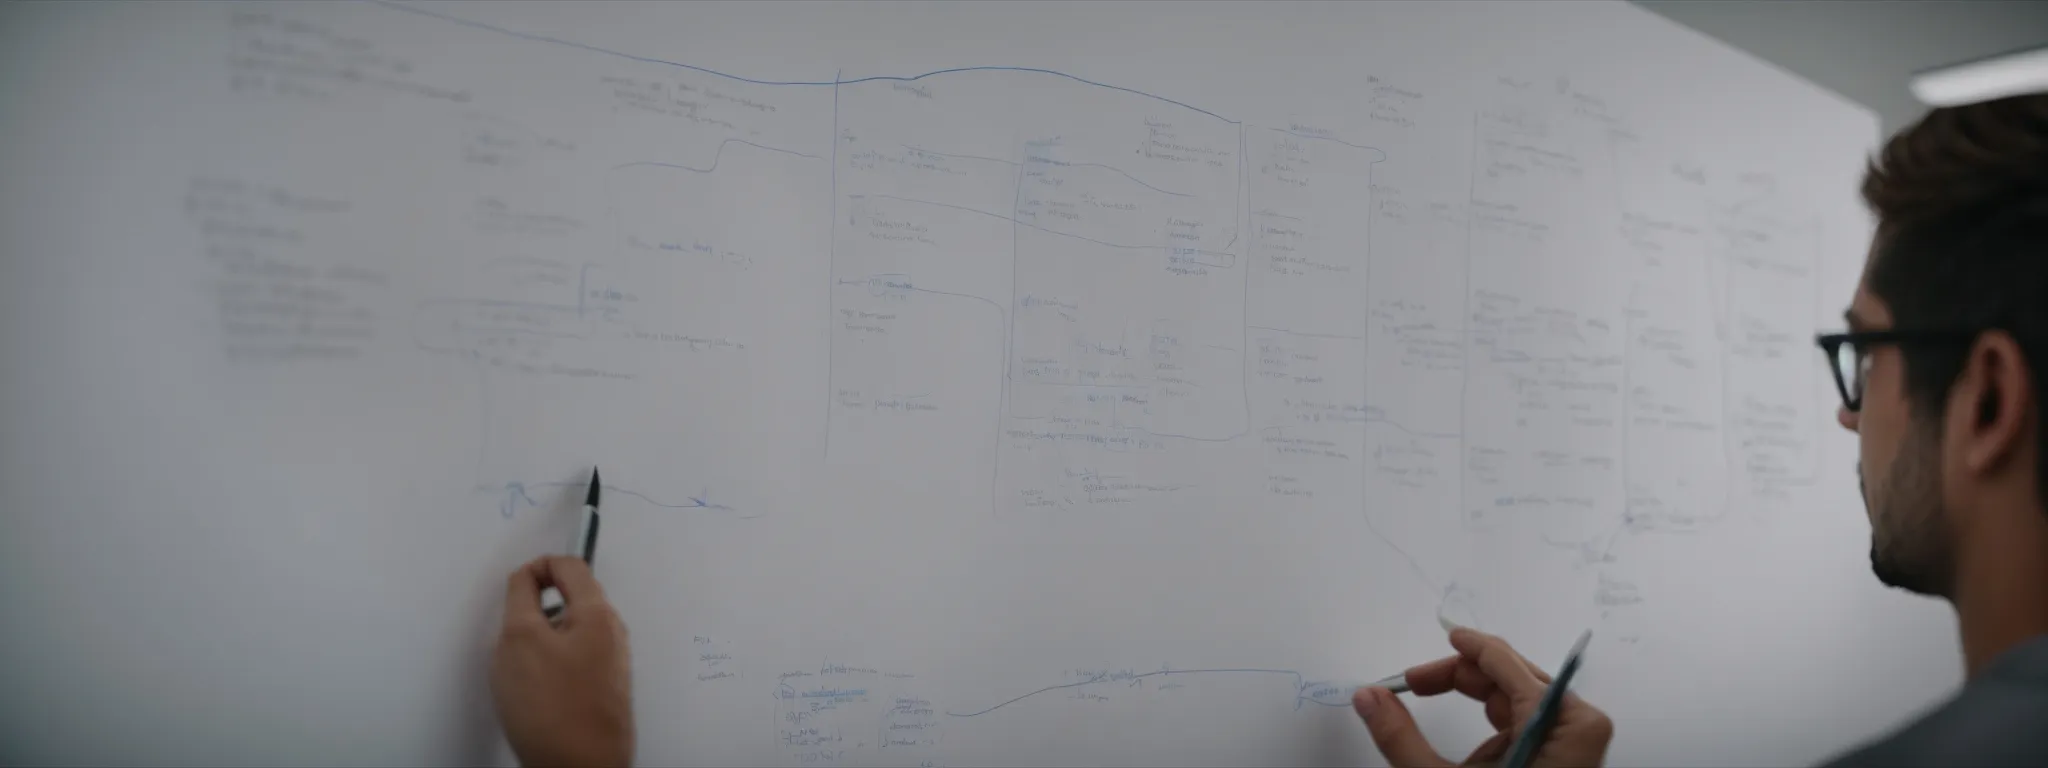 a web designer sketches a sitemap on a whiteboard to optimize website navigation.